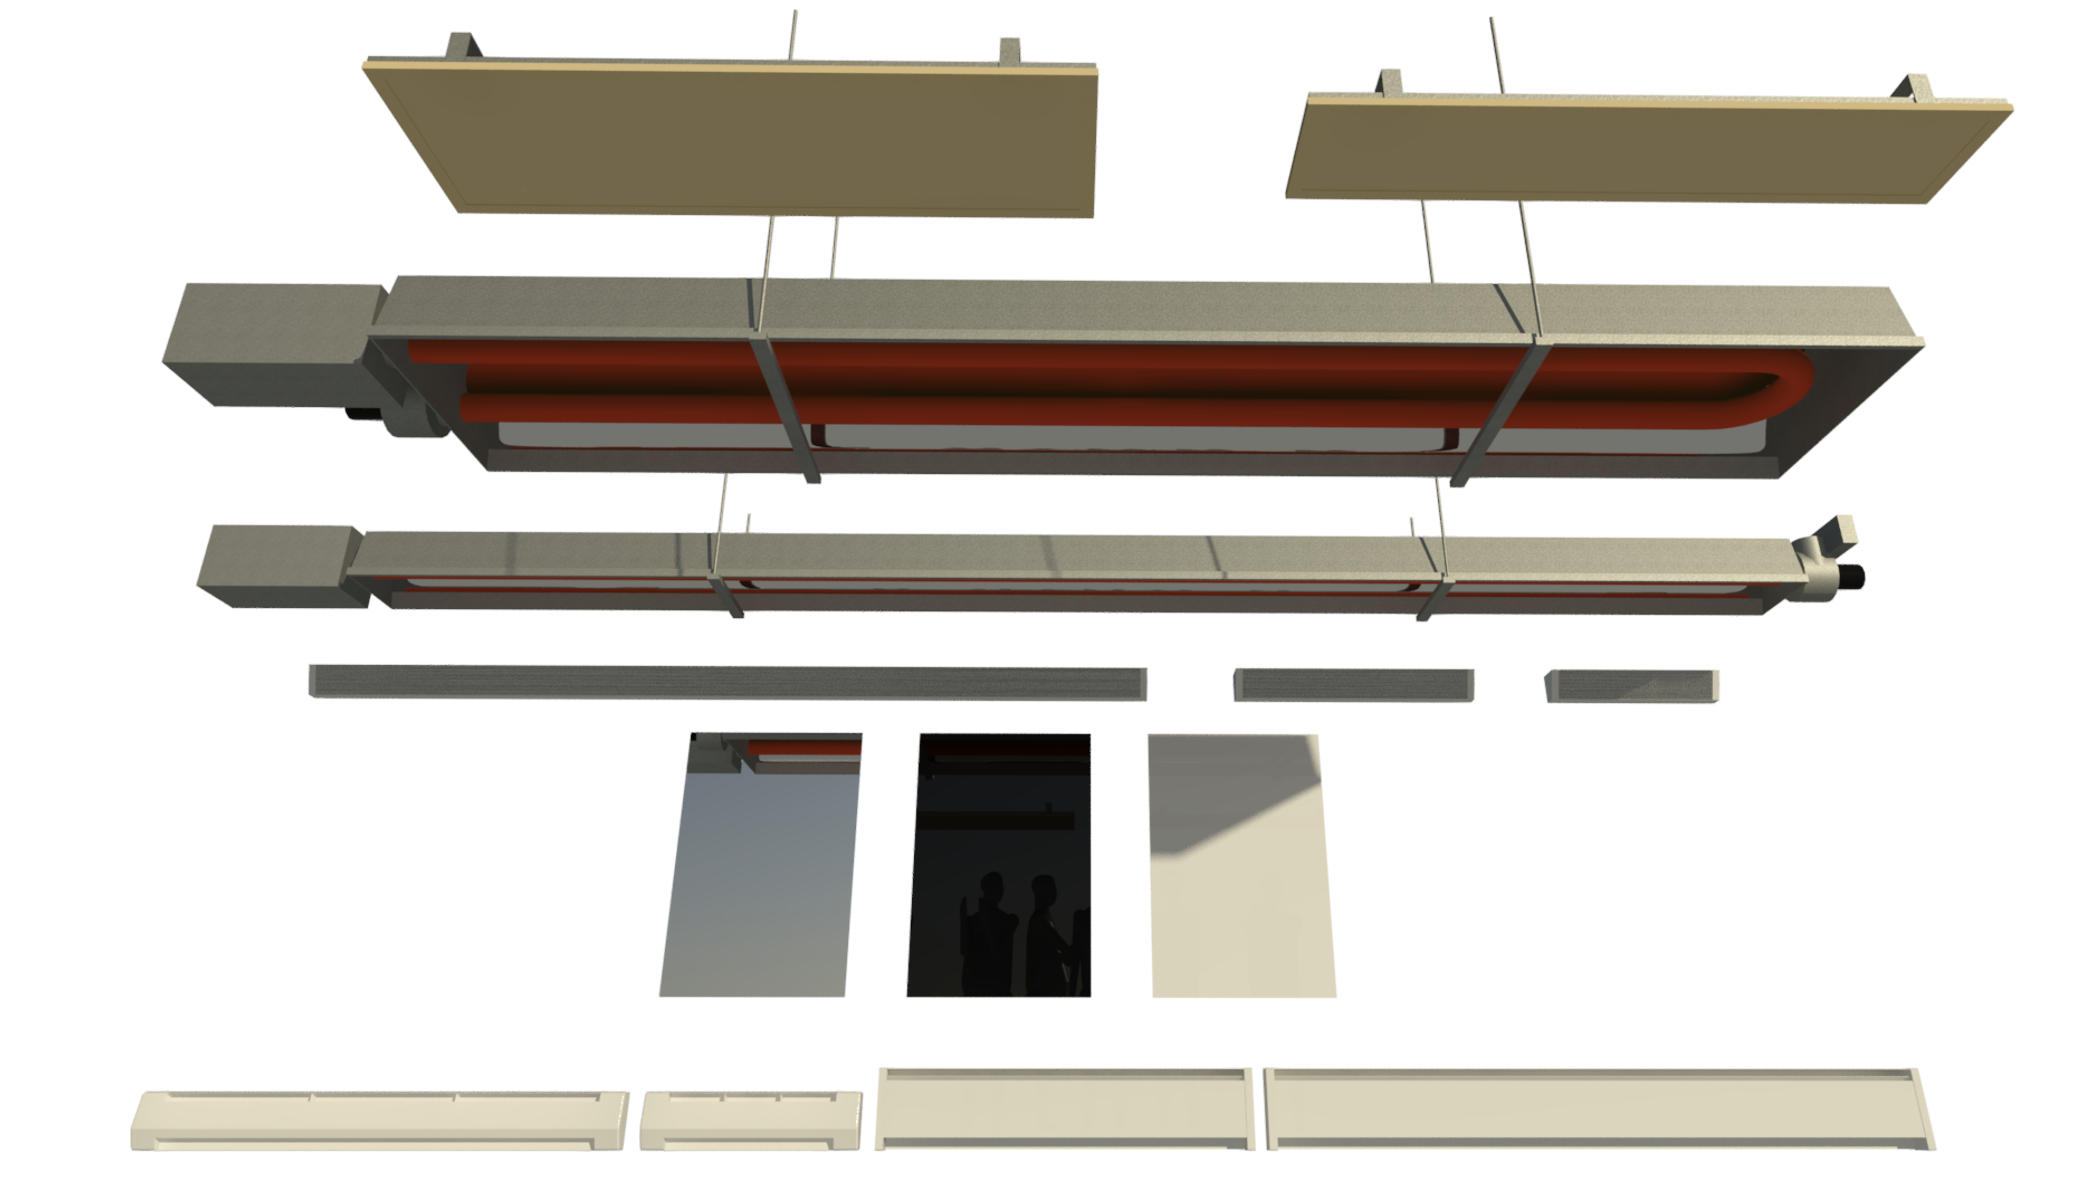 Render of the collection - Ceiling-mounted radiant heat panels, Fixing brackets and electrical connection box, L-Shaped radiant tube heater, U-shaped radiant tube heater, Wall-mounted cove heaters, Wall-mounted baseboard heaters, Wall-mounted baseboard heaters